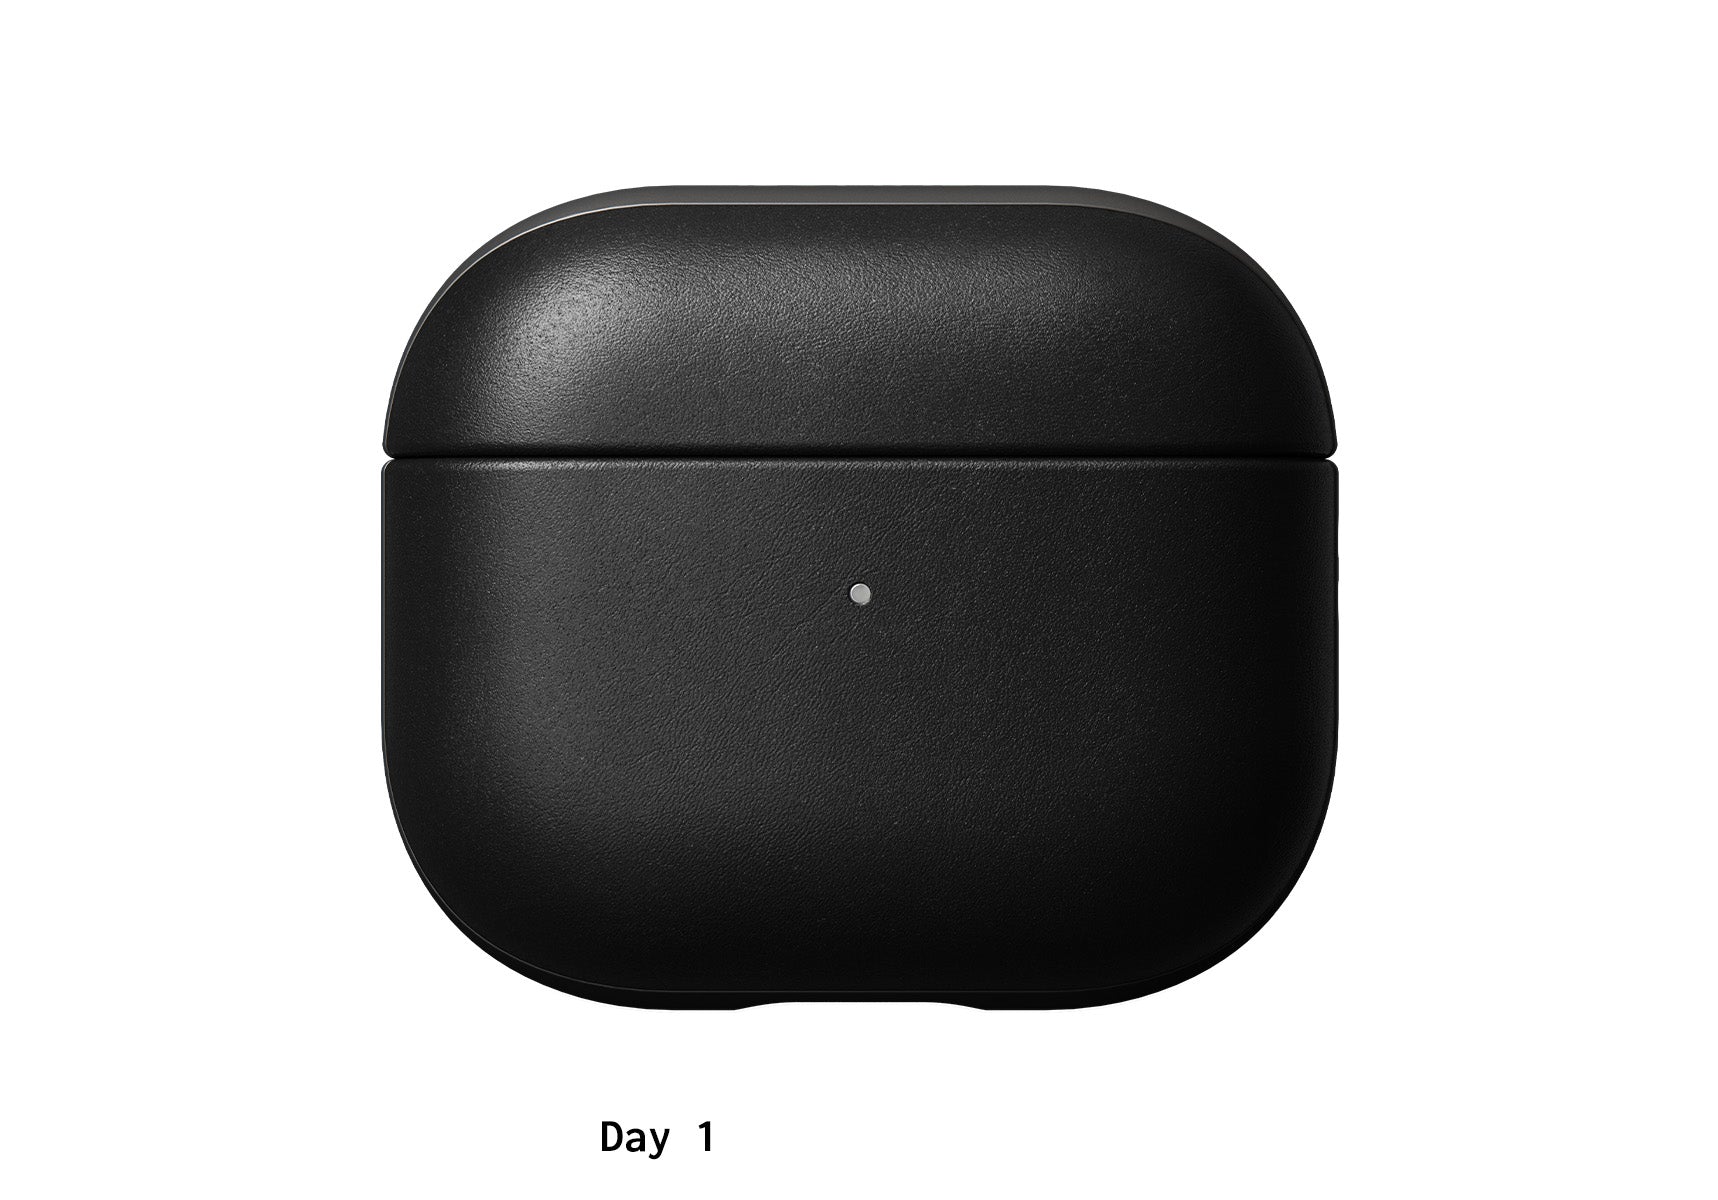 Chic Leather Cases for Apple AirPods 3 | Shop Noémie White/Black